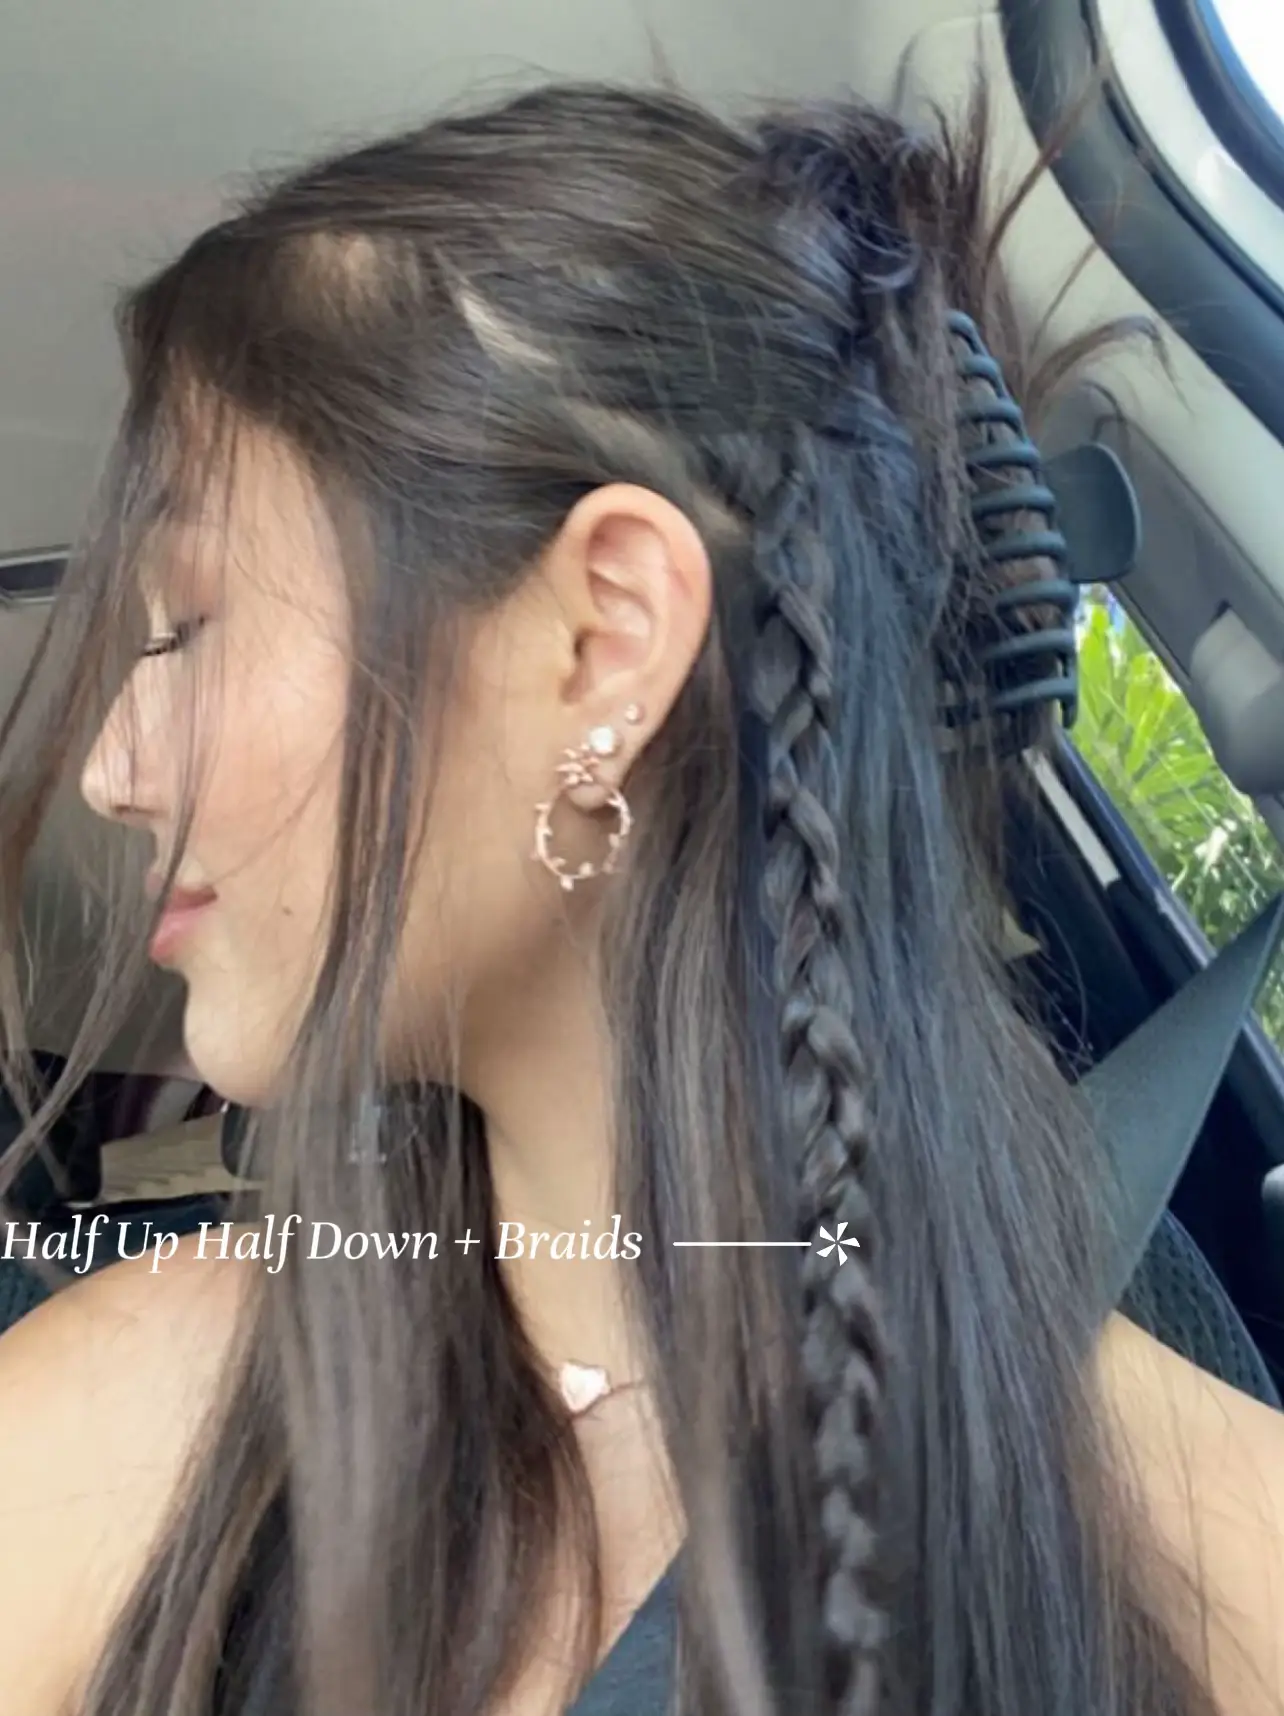 relax I have big ears too #hairtok #easyhairstyles #hairstyletutorial, hairstyles ideas